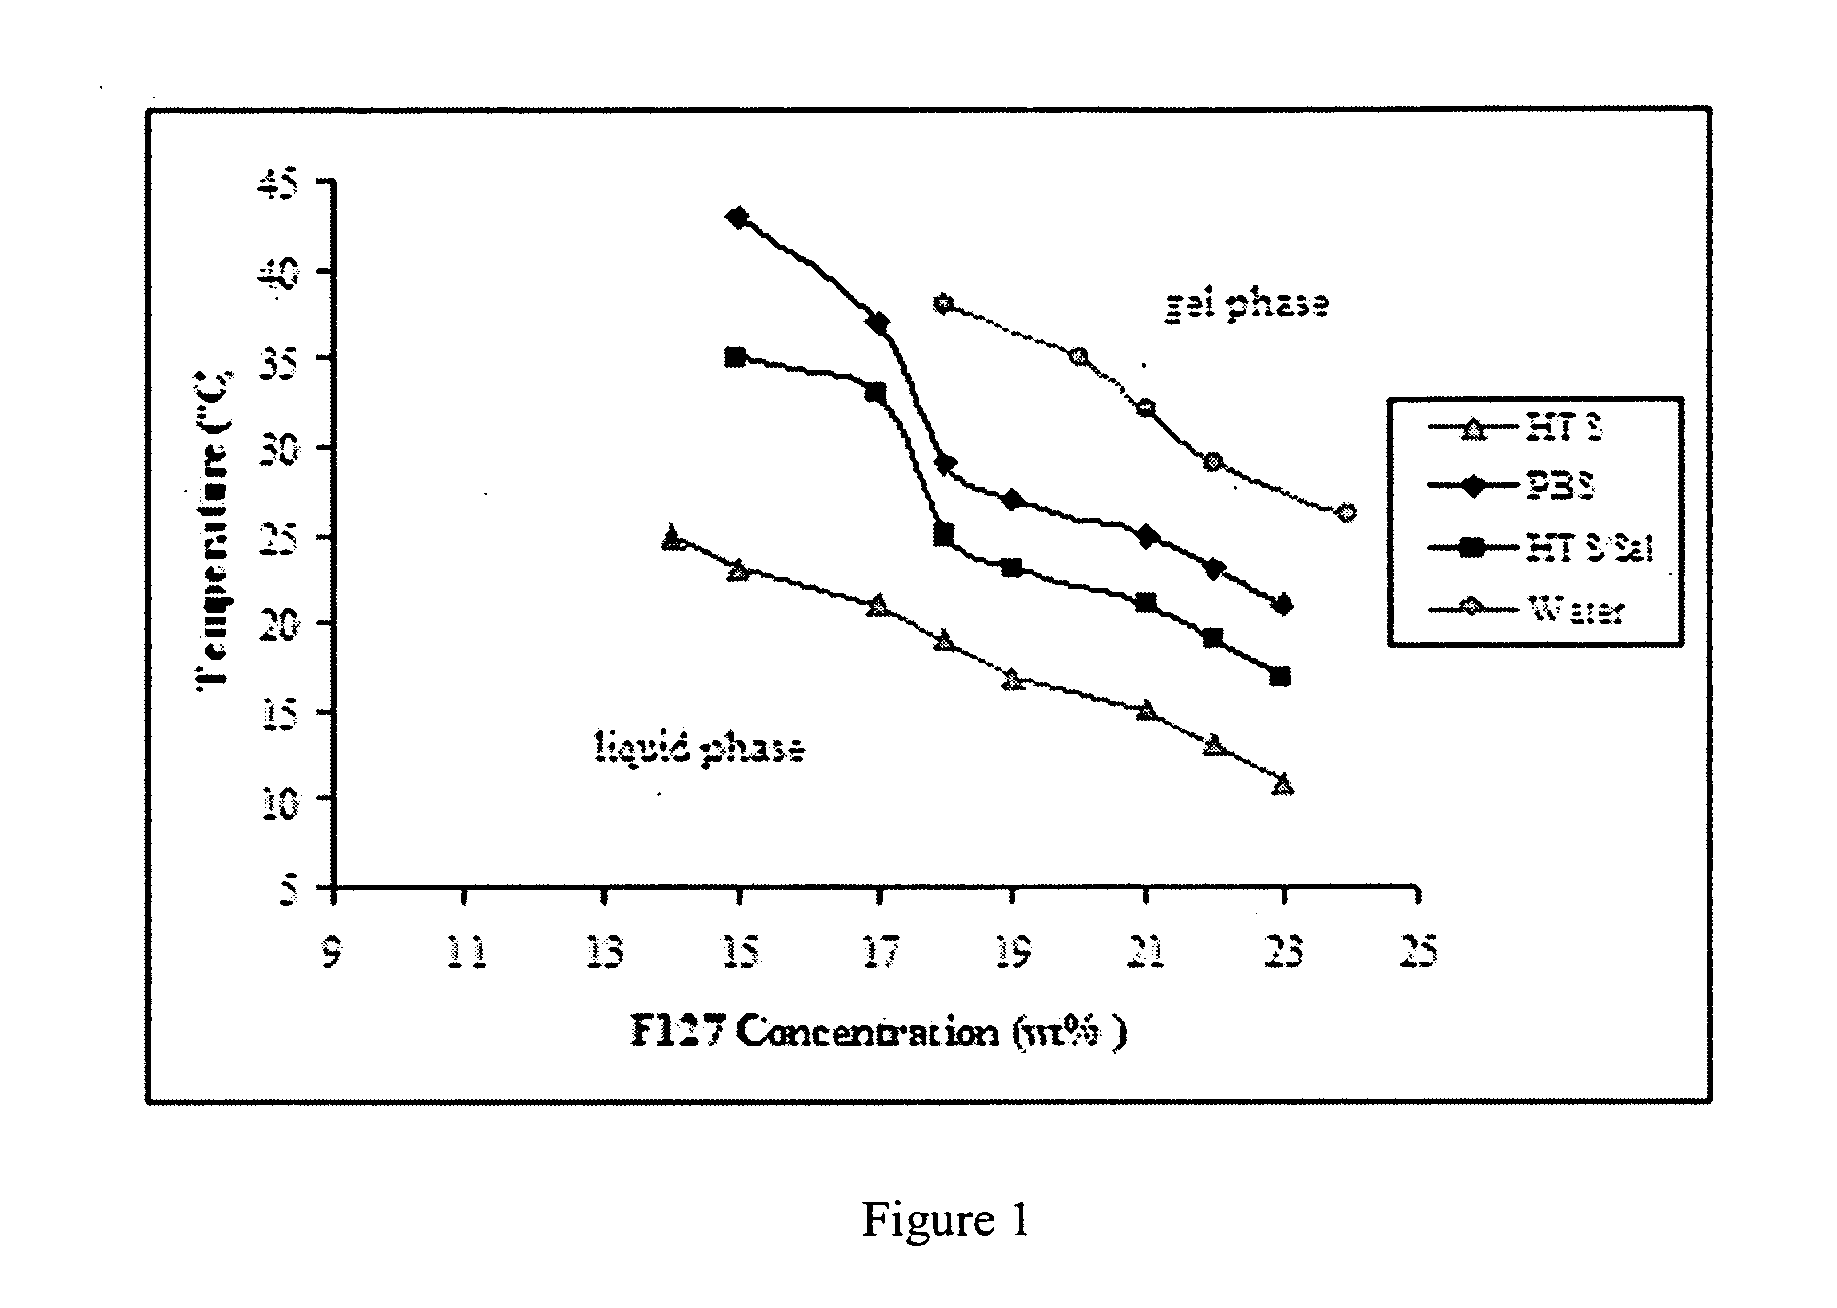 Adaptive SOL-GEL immobilization agents for cell delivery